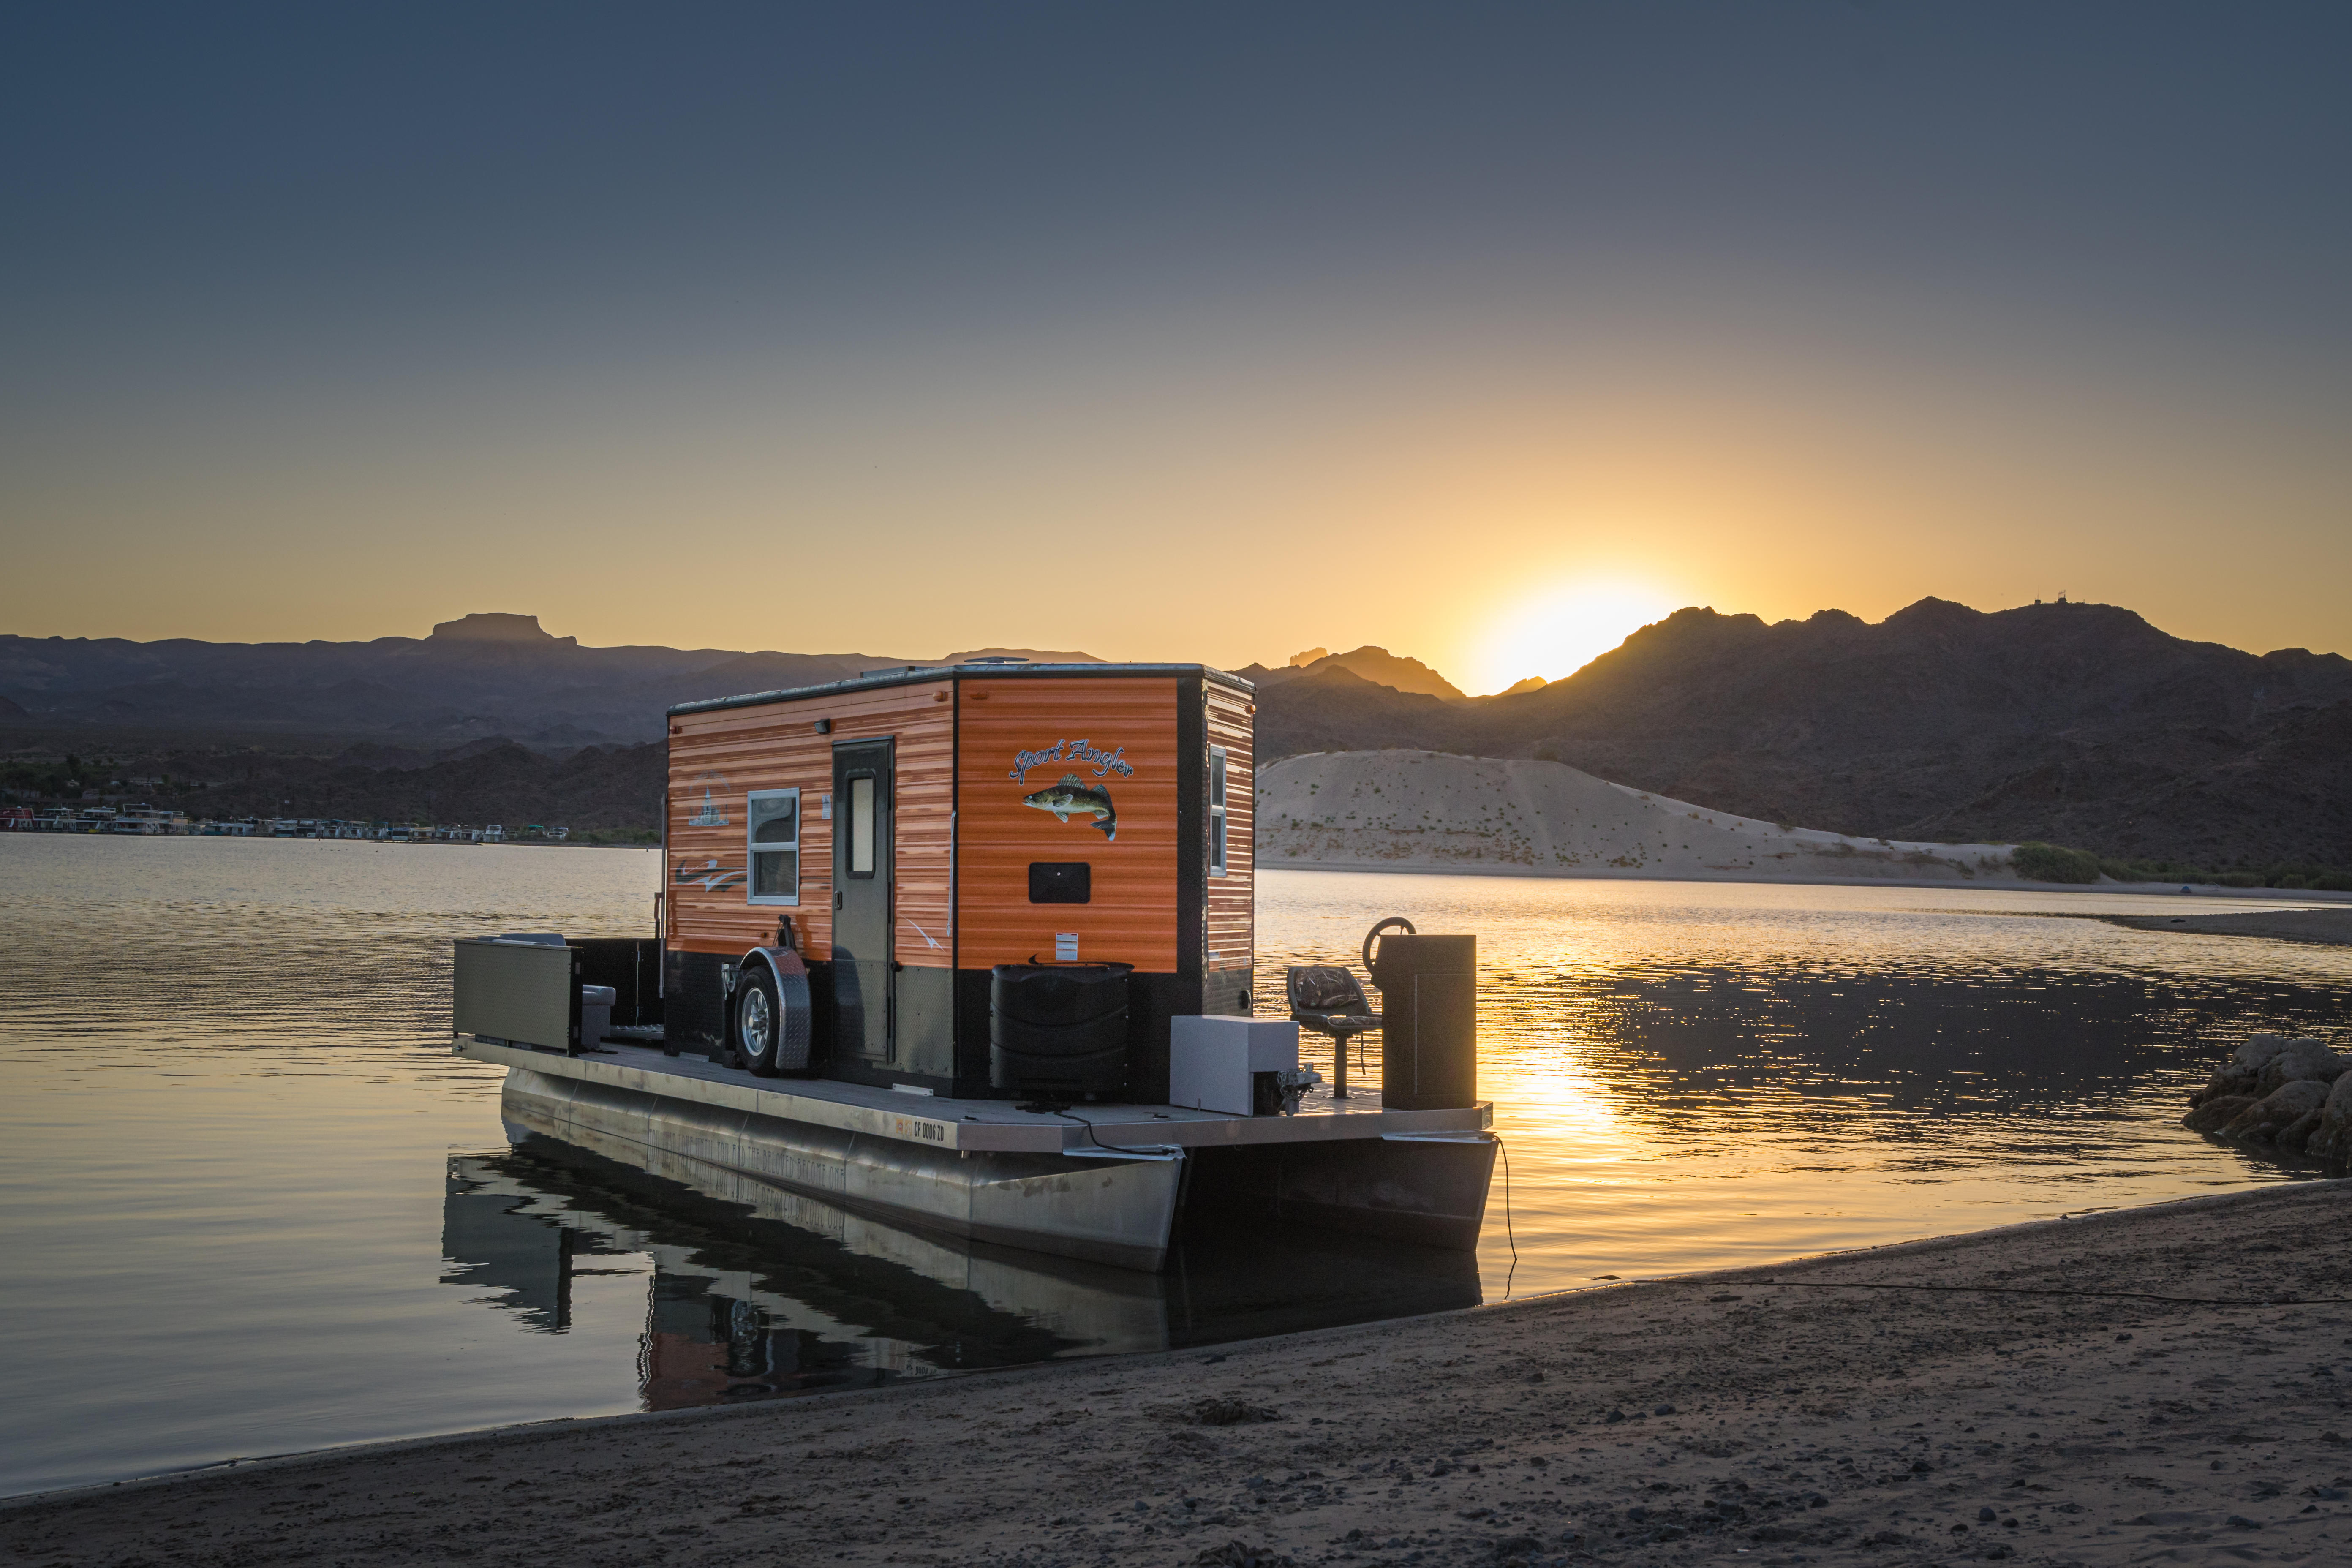 An orange trailer sits on a pontoon-style boat in the water with mountains in the background and the sun setting.